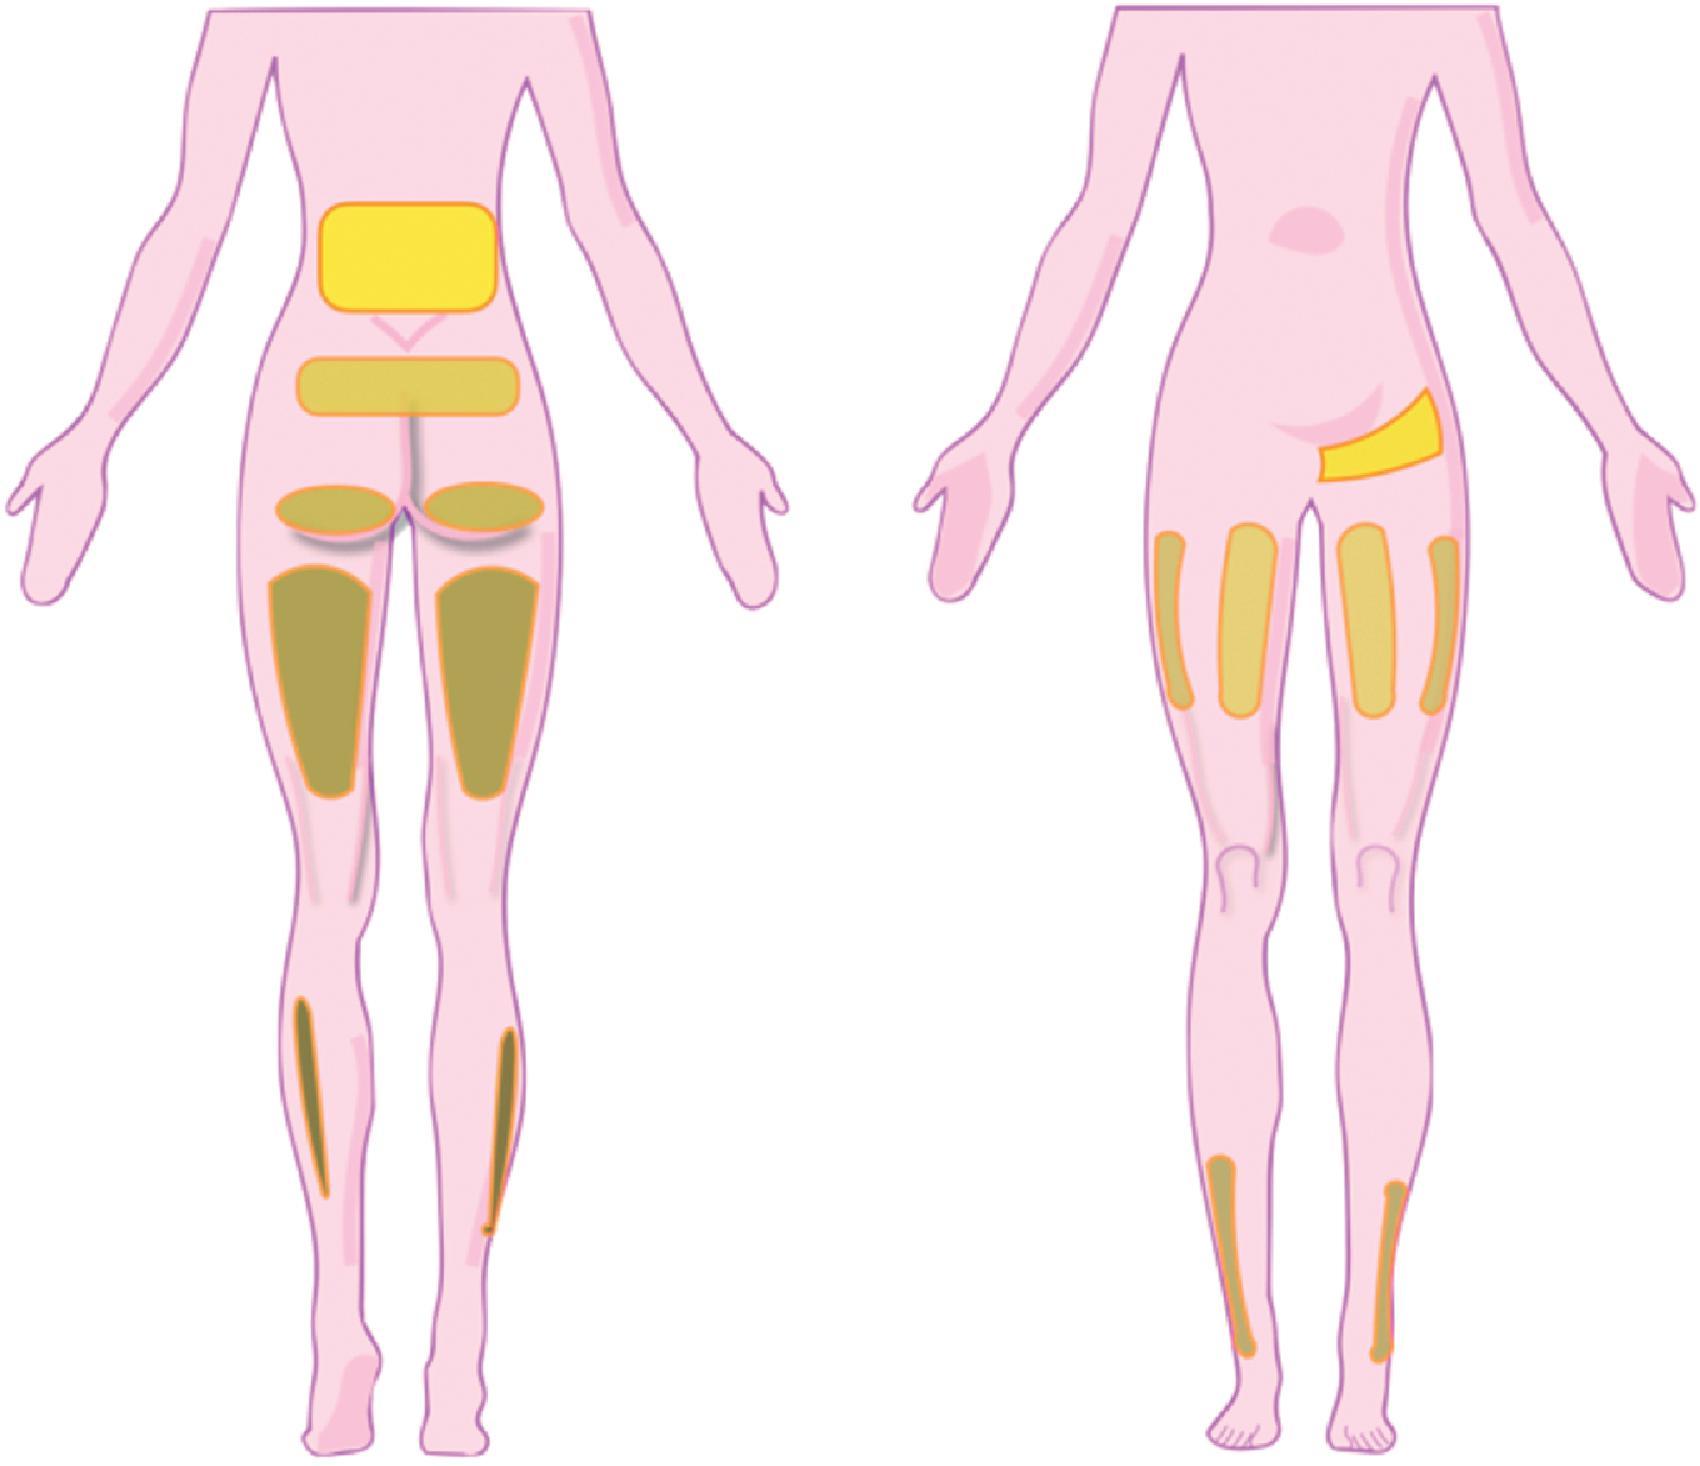 Figure 31.4, Pain referral patterns from the lumbar facet joints. The most common referral patterns extend from the darkest (low back) to the lightest regions (flank and foot) in descending order. The following key is listed in order of affected frequency (i.e. low back to foot). The facet levels next to each location represent the zygapophyseal joints most associated with pain in each region. Low back: L5-S1, L4-5, L3-4; buttock: L5-S1, L4-5, L3-4; lateral thigh area: L5-S1, L4-5, L3-4, L2-3; posterior thigh area: L5-S1, L4-5, L3-4; greater trochanter: L5-S1, L4-5, L3-4, L2-3; groin: L5-S1, L4-5, L3-4, L2-3, L1-2; anterior thigh area: L5-S1, L4-5, L3-4; lateral lower leg area: L5-S1, L4-5, L3-4; upper back area: L3-4, L2-3, L1-2; flank: L1-2, L2-3; foot: L5-S1, L4-5. (Adapted from Cohen, SP, Raja SN. Pathogenesis, diagnosis, and treatment of lumbar zygapophysial facet joint pain. Anesthesiology . 2007;106:591–614.)